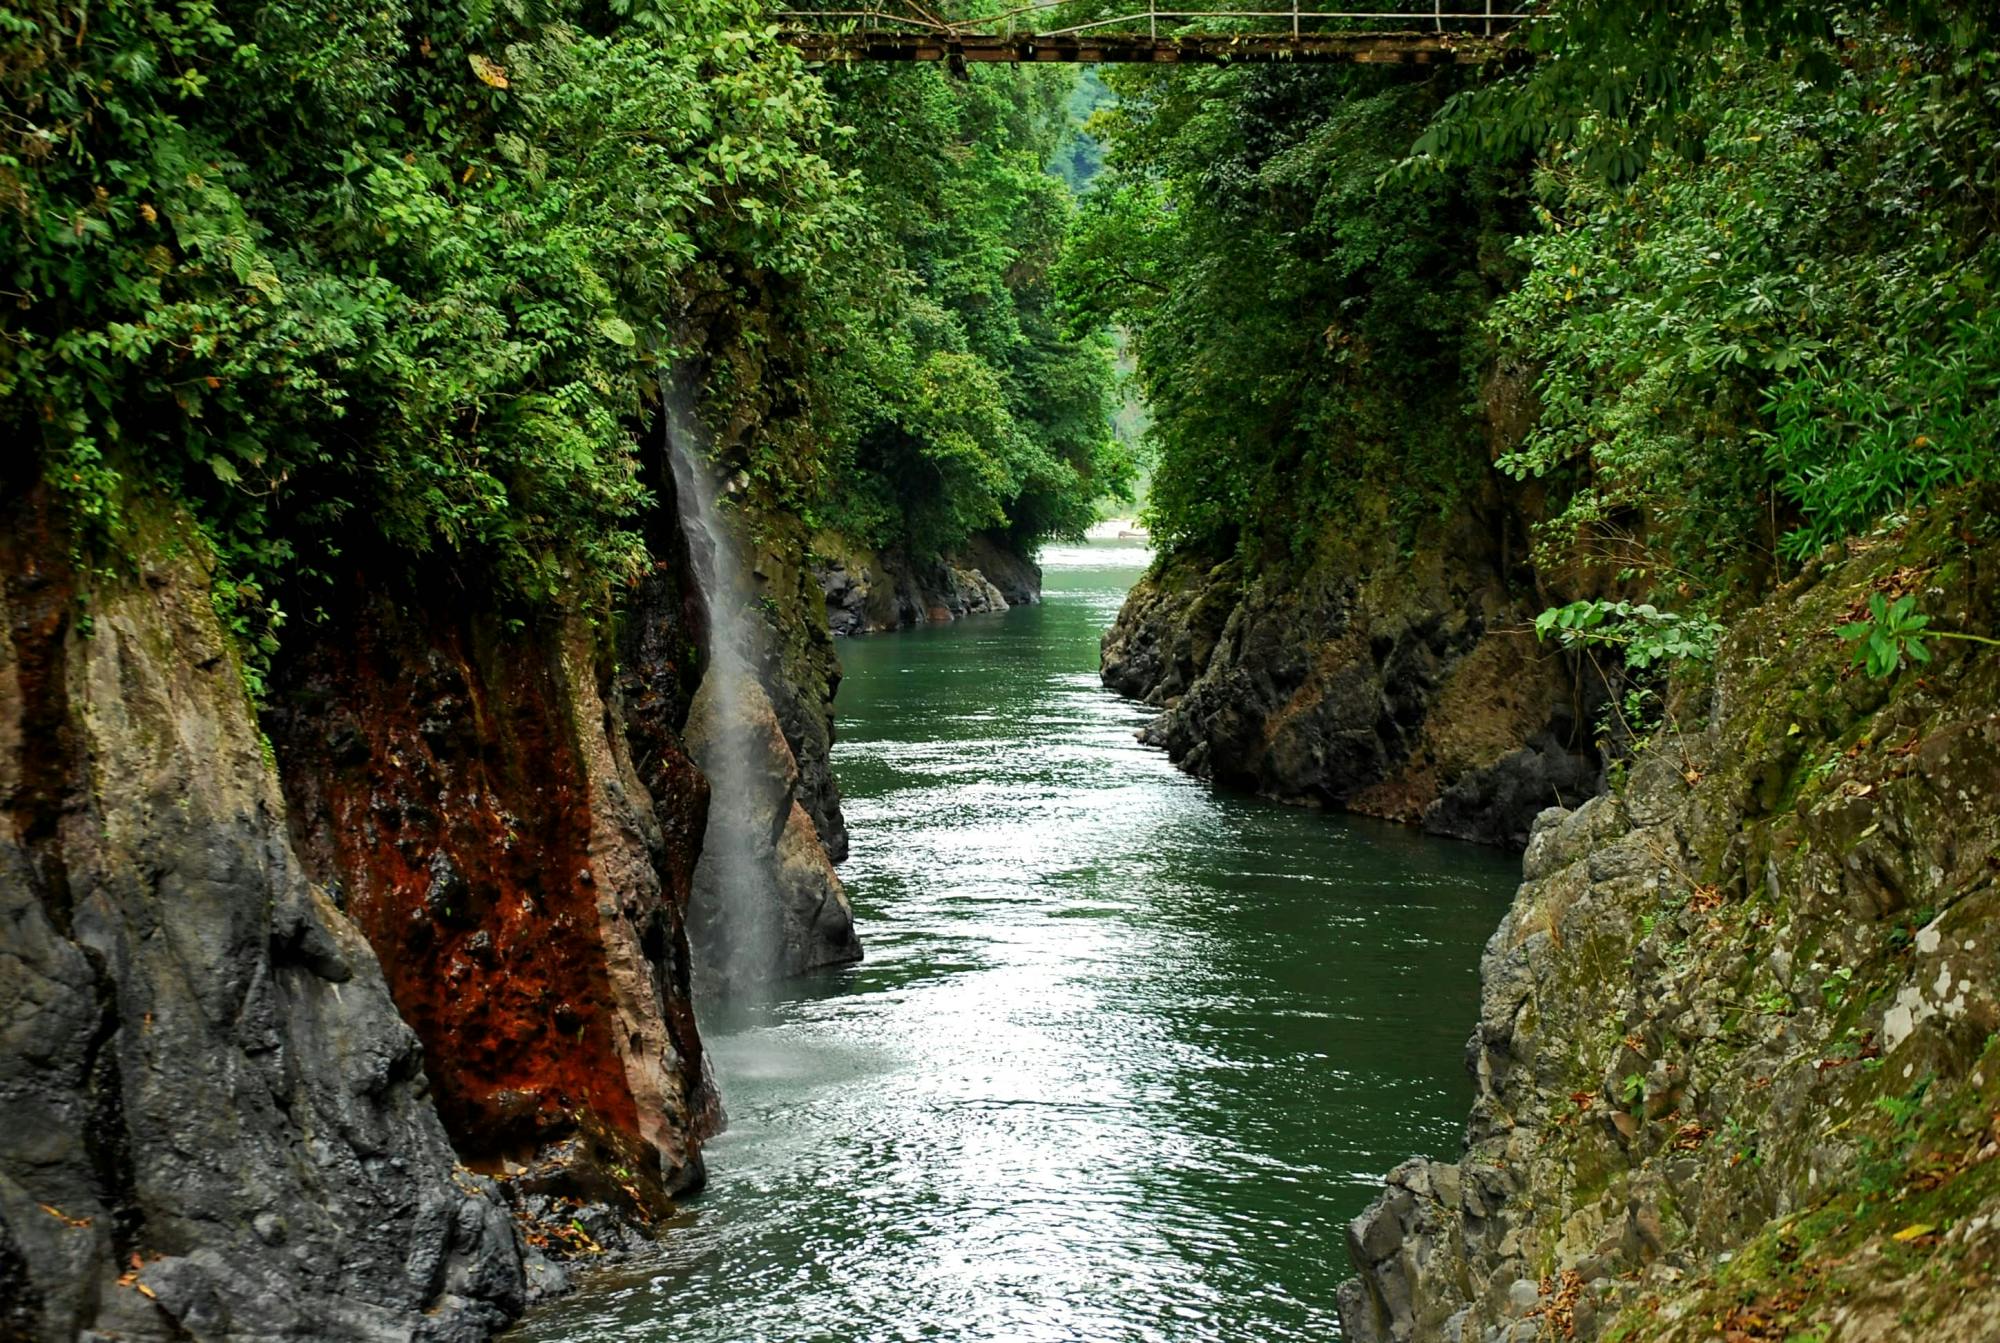 Rafting on Pacuare River Class III - IV Ticket